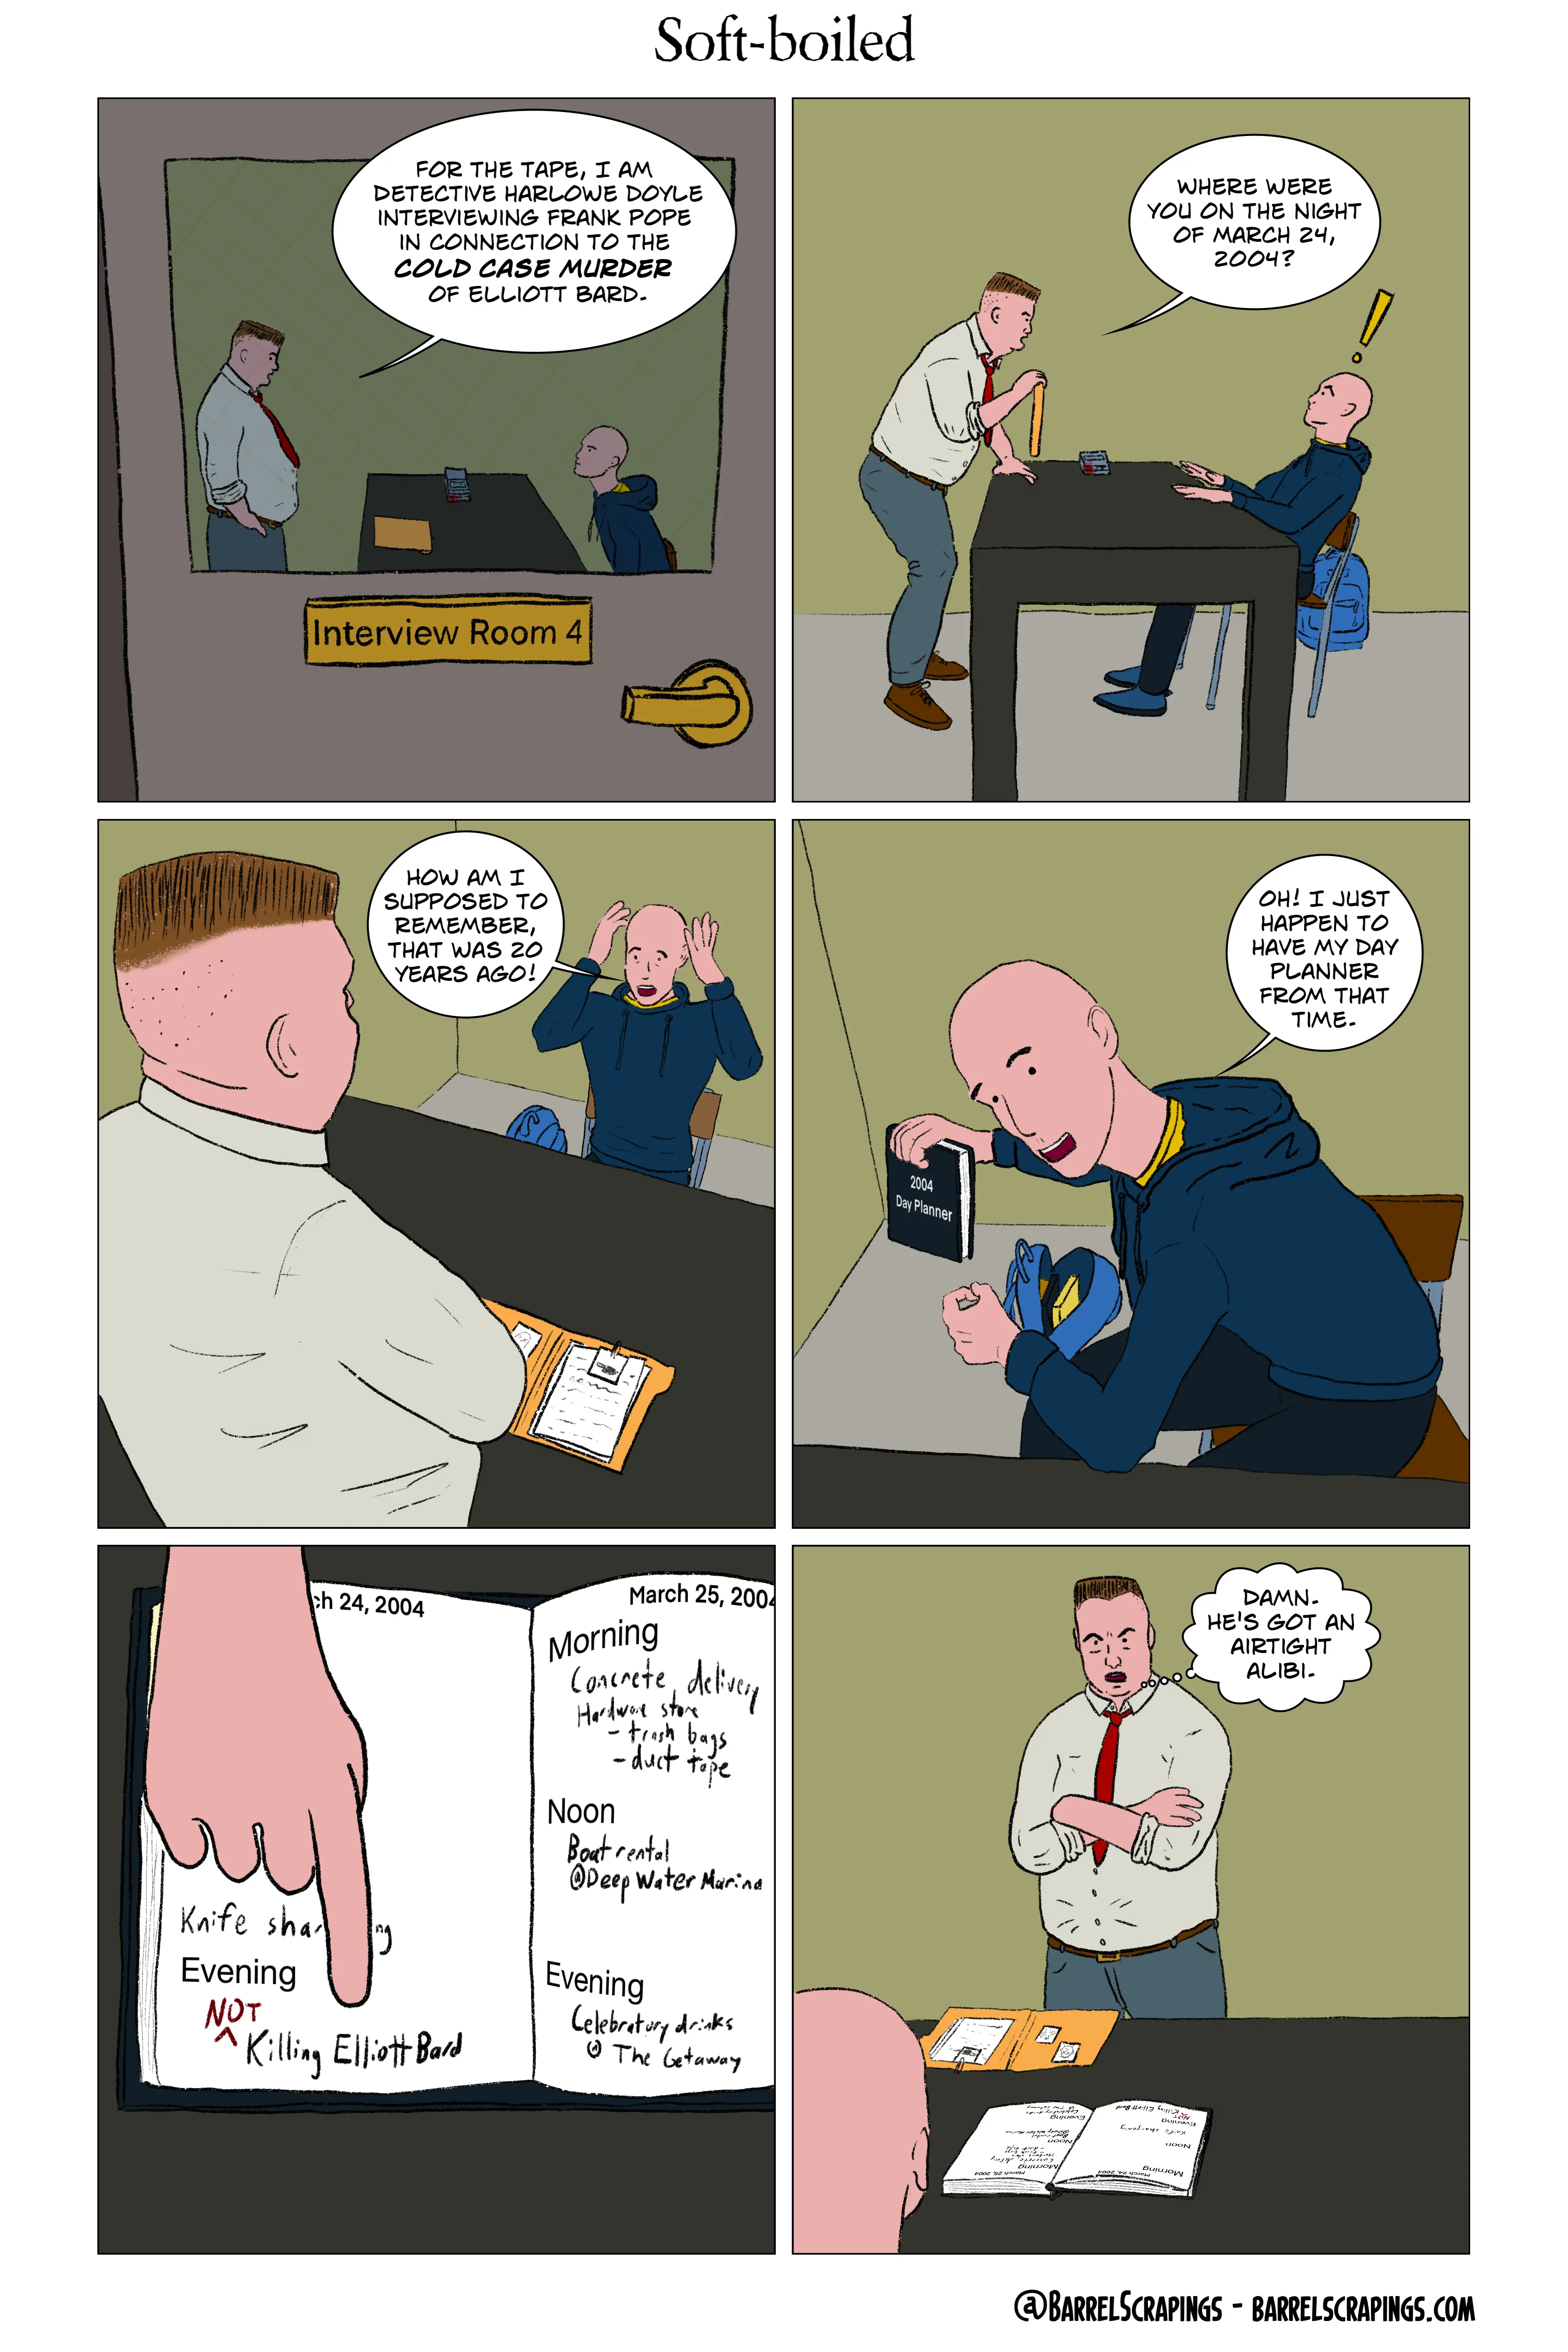 Six panels. Panel 1: Peering through a window of a door marked “Interview Room 4”. A fat man is standing in front of a table with a recorder on it. A man in hooded sweatshirt is seated facing him. The fat man says, “For the tape, I am Detective Harlowe Doyle interviewing Frank Pope in connection to the cold case murder of Elliott Bard.” Panel 2: The fat cop aggressively leans toward the man. The man scoots bback in his chair, startled. “Where were you on the night of March 24, 2004?” Panel 3: Frank pope puts his hands up in alarm. “How am I supposed to remember, that was 20 years ago!” Panel 4: Frank pope opens his backpack, holds up a book. “Oh! I just happen to have my day planner from that time.” Panel 5: Close up on the day planner opened to March 24 and March 25, 2004. Frank Pope’s finger points at the entry for the evening of March 24, which says “Killing Elliott Bard” with a “NOT” inserted next to it in red. Above that entry, you can see “Knife sharpening” obscured. Morning of March 25 - “Concrete delivery. Hardware store - trash bags, duct tape. Noon - boat rental @ Deep Water Marina. Evening - Celebratory drinks @ The Getaway”. Panel 6: Harlowe Doyle stands with arms crossed, angry. Thought bubble: “Damn. He’s got an airtight alibi.